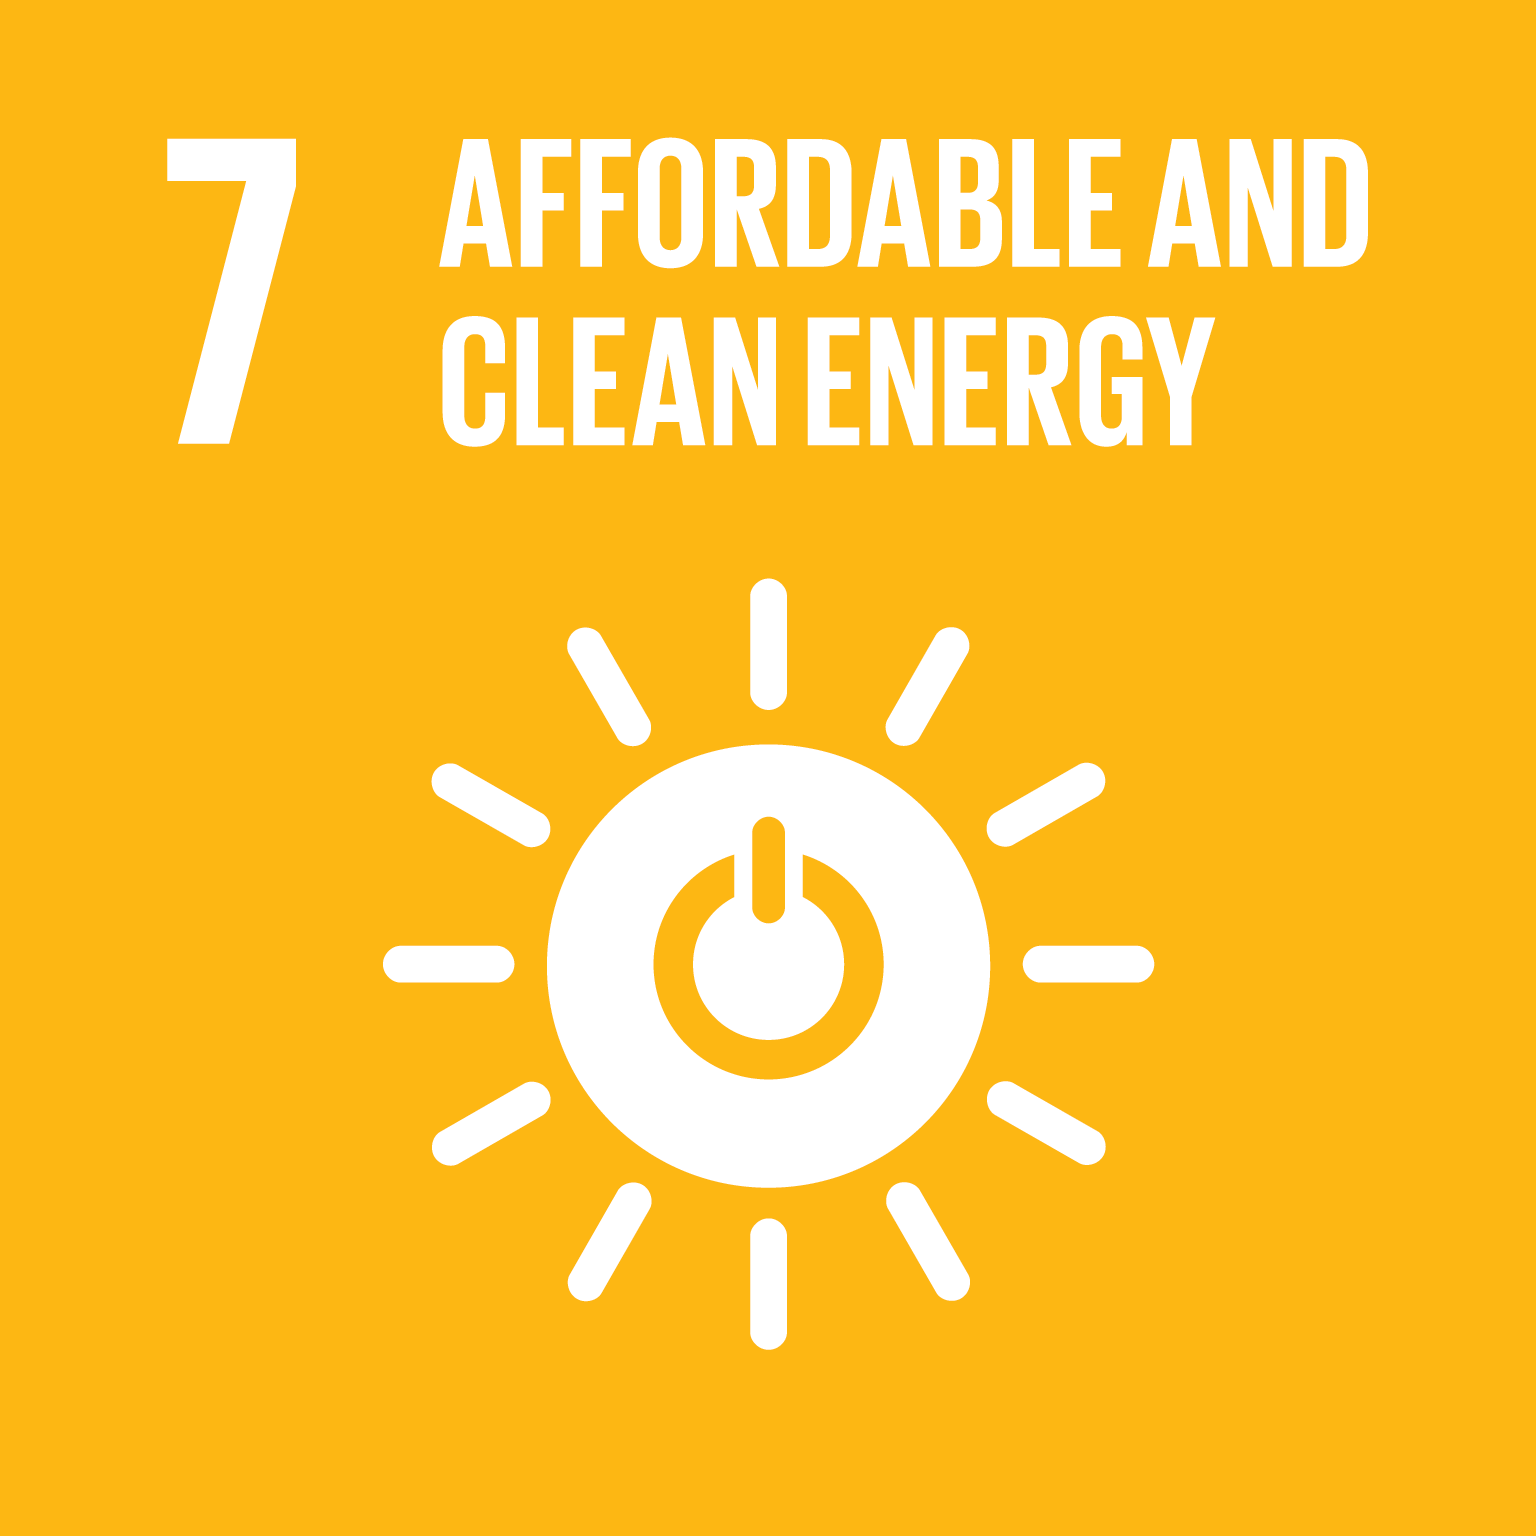 sustainable development goal 7 icon affordable and clean energy